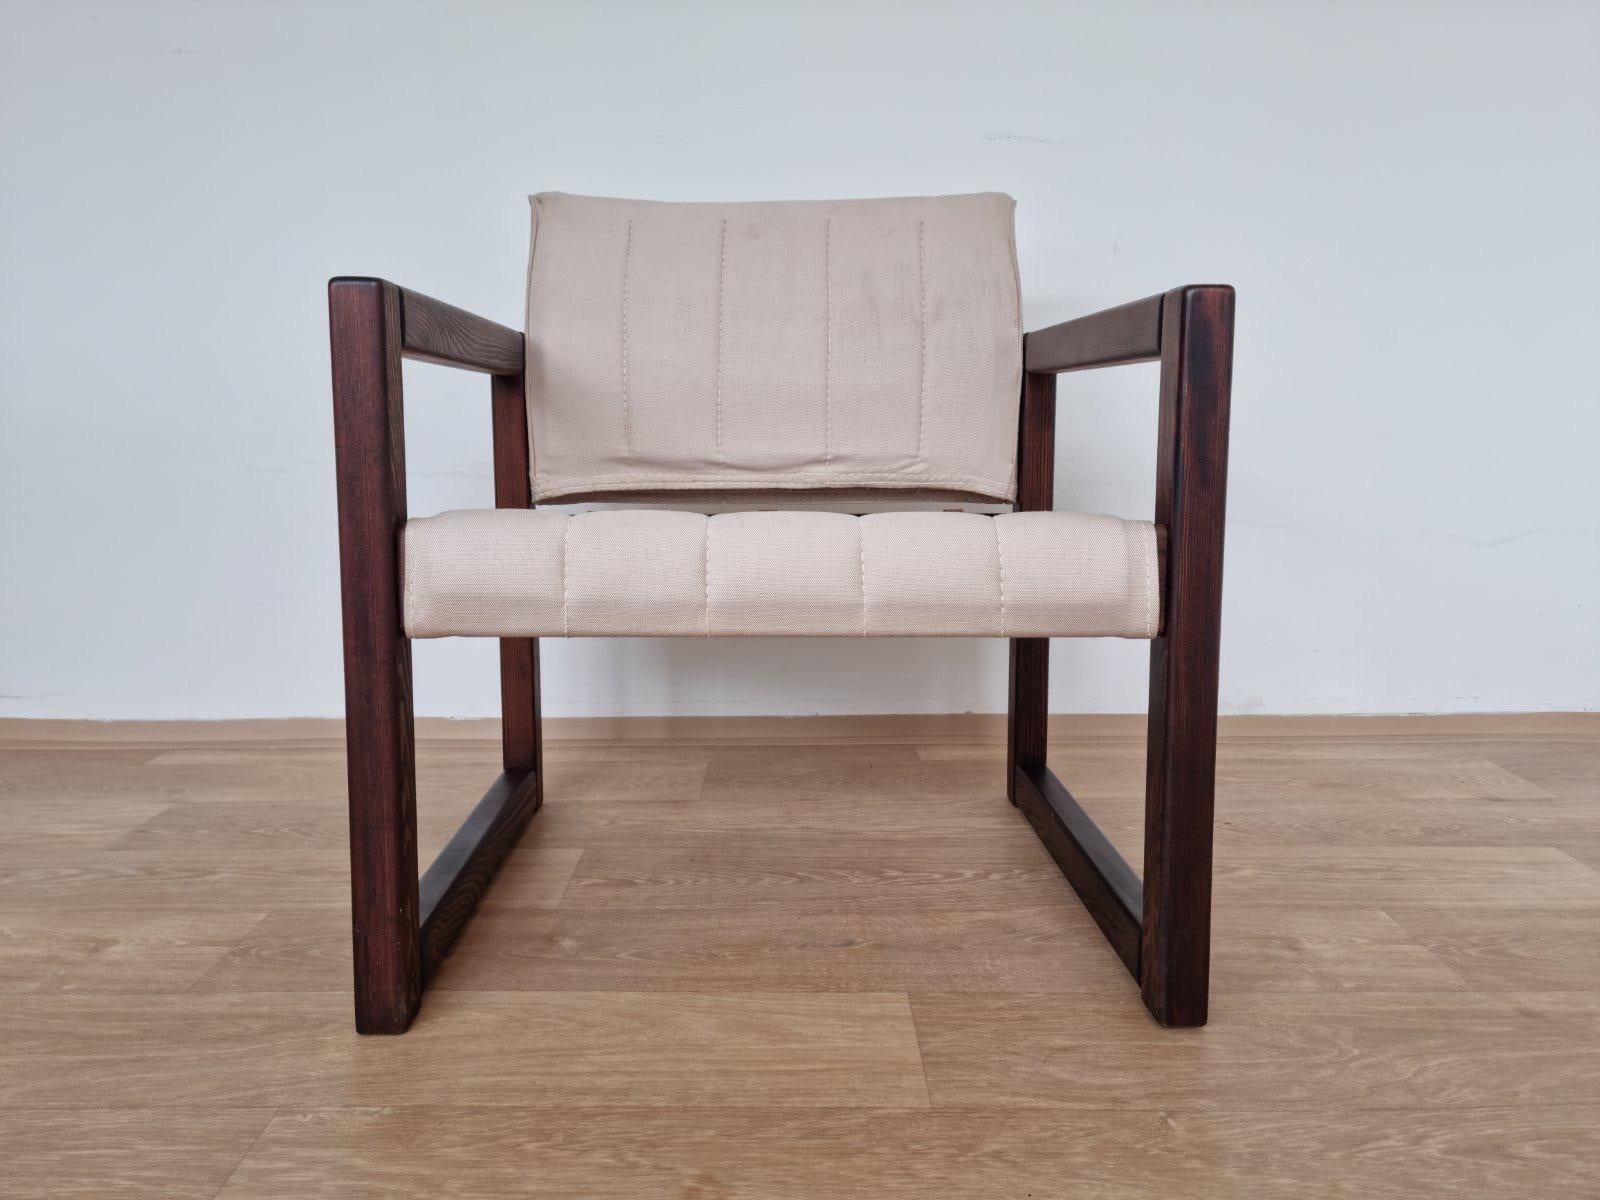 Mid-Century Modern Scandinavian Safari Armchair by Karin Mobring, 1980s / Never Used For Sale